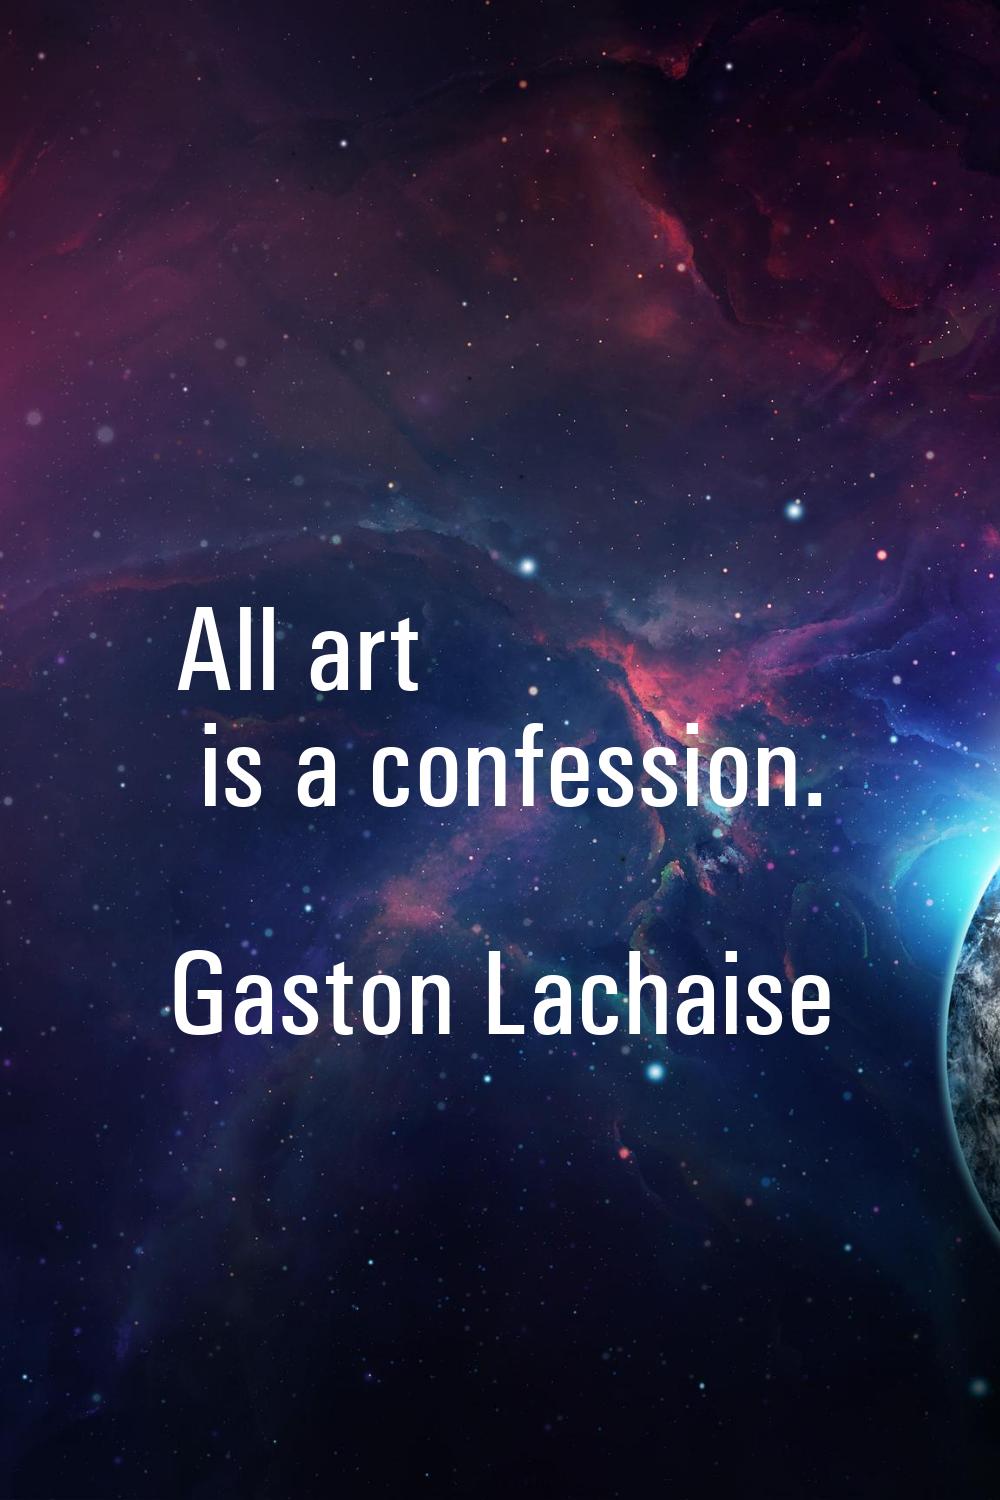 All art is a confession.